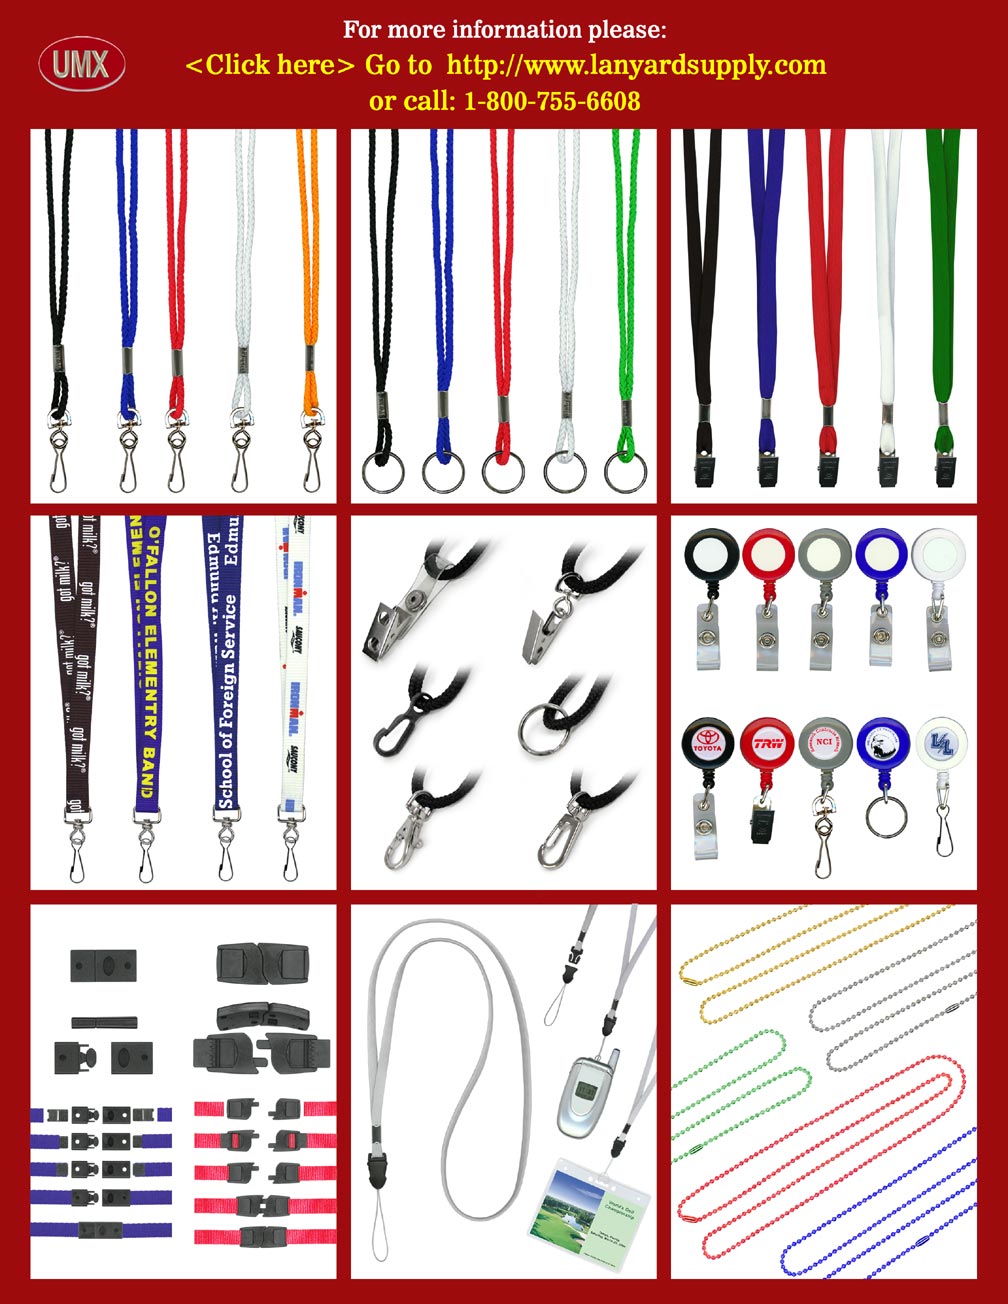 UMX High Quality and Low Cost ID Badge Lanyards Supply